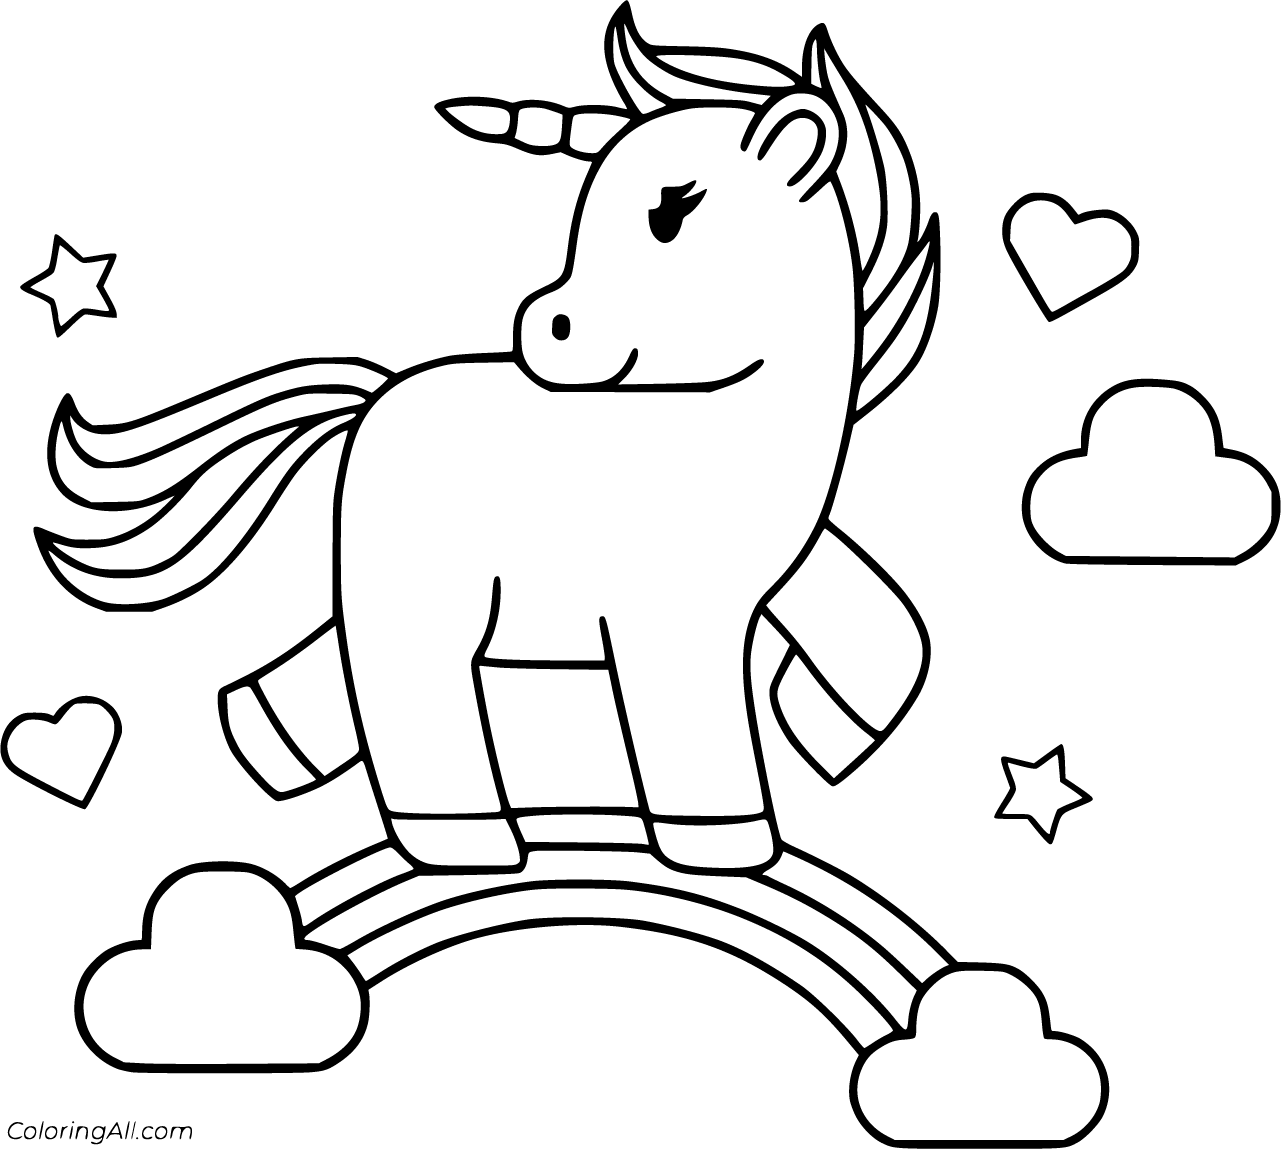 Rainbow Coloring Sheet Stock Illustrations – 242 Rainbow Coloring Sheet  Stock Illustrations, Vectors & Clipart - Dreamstime